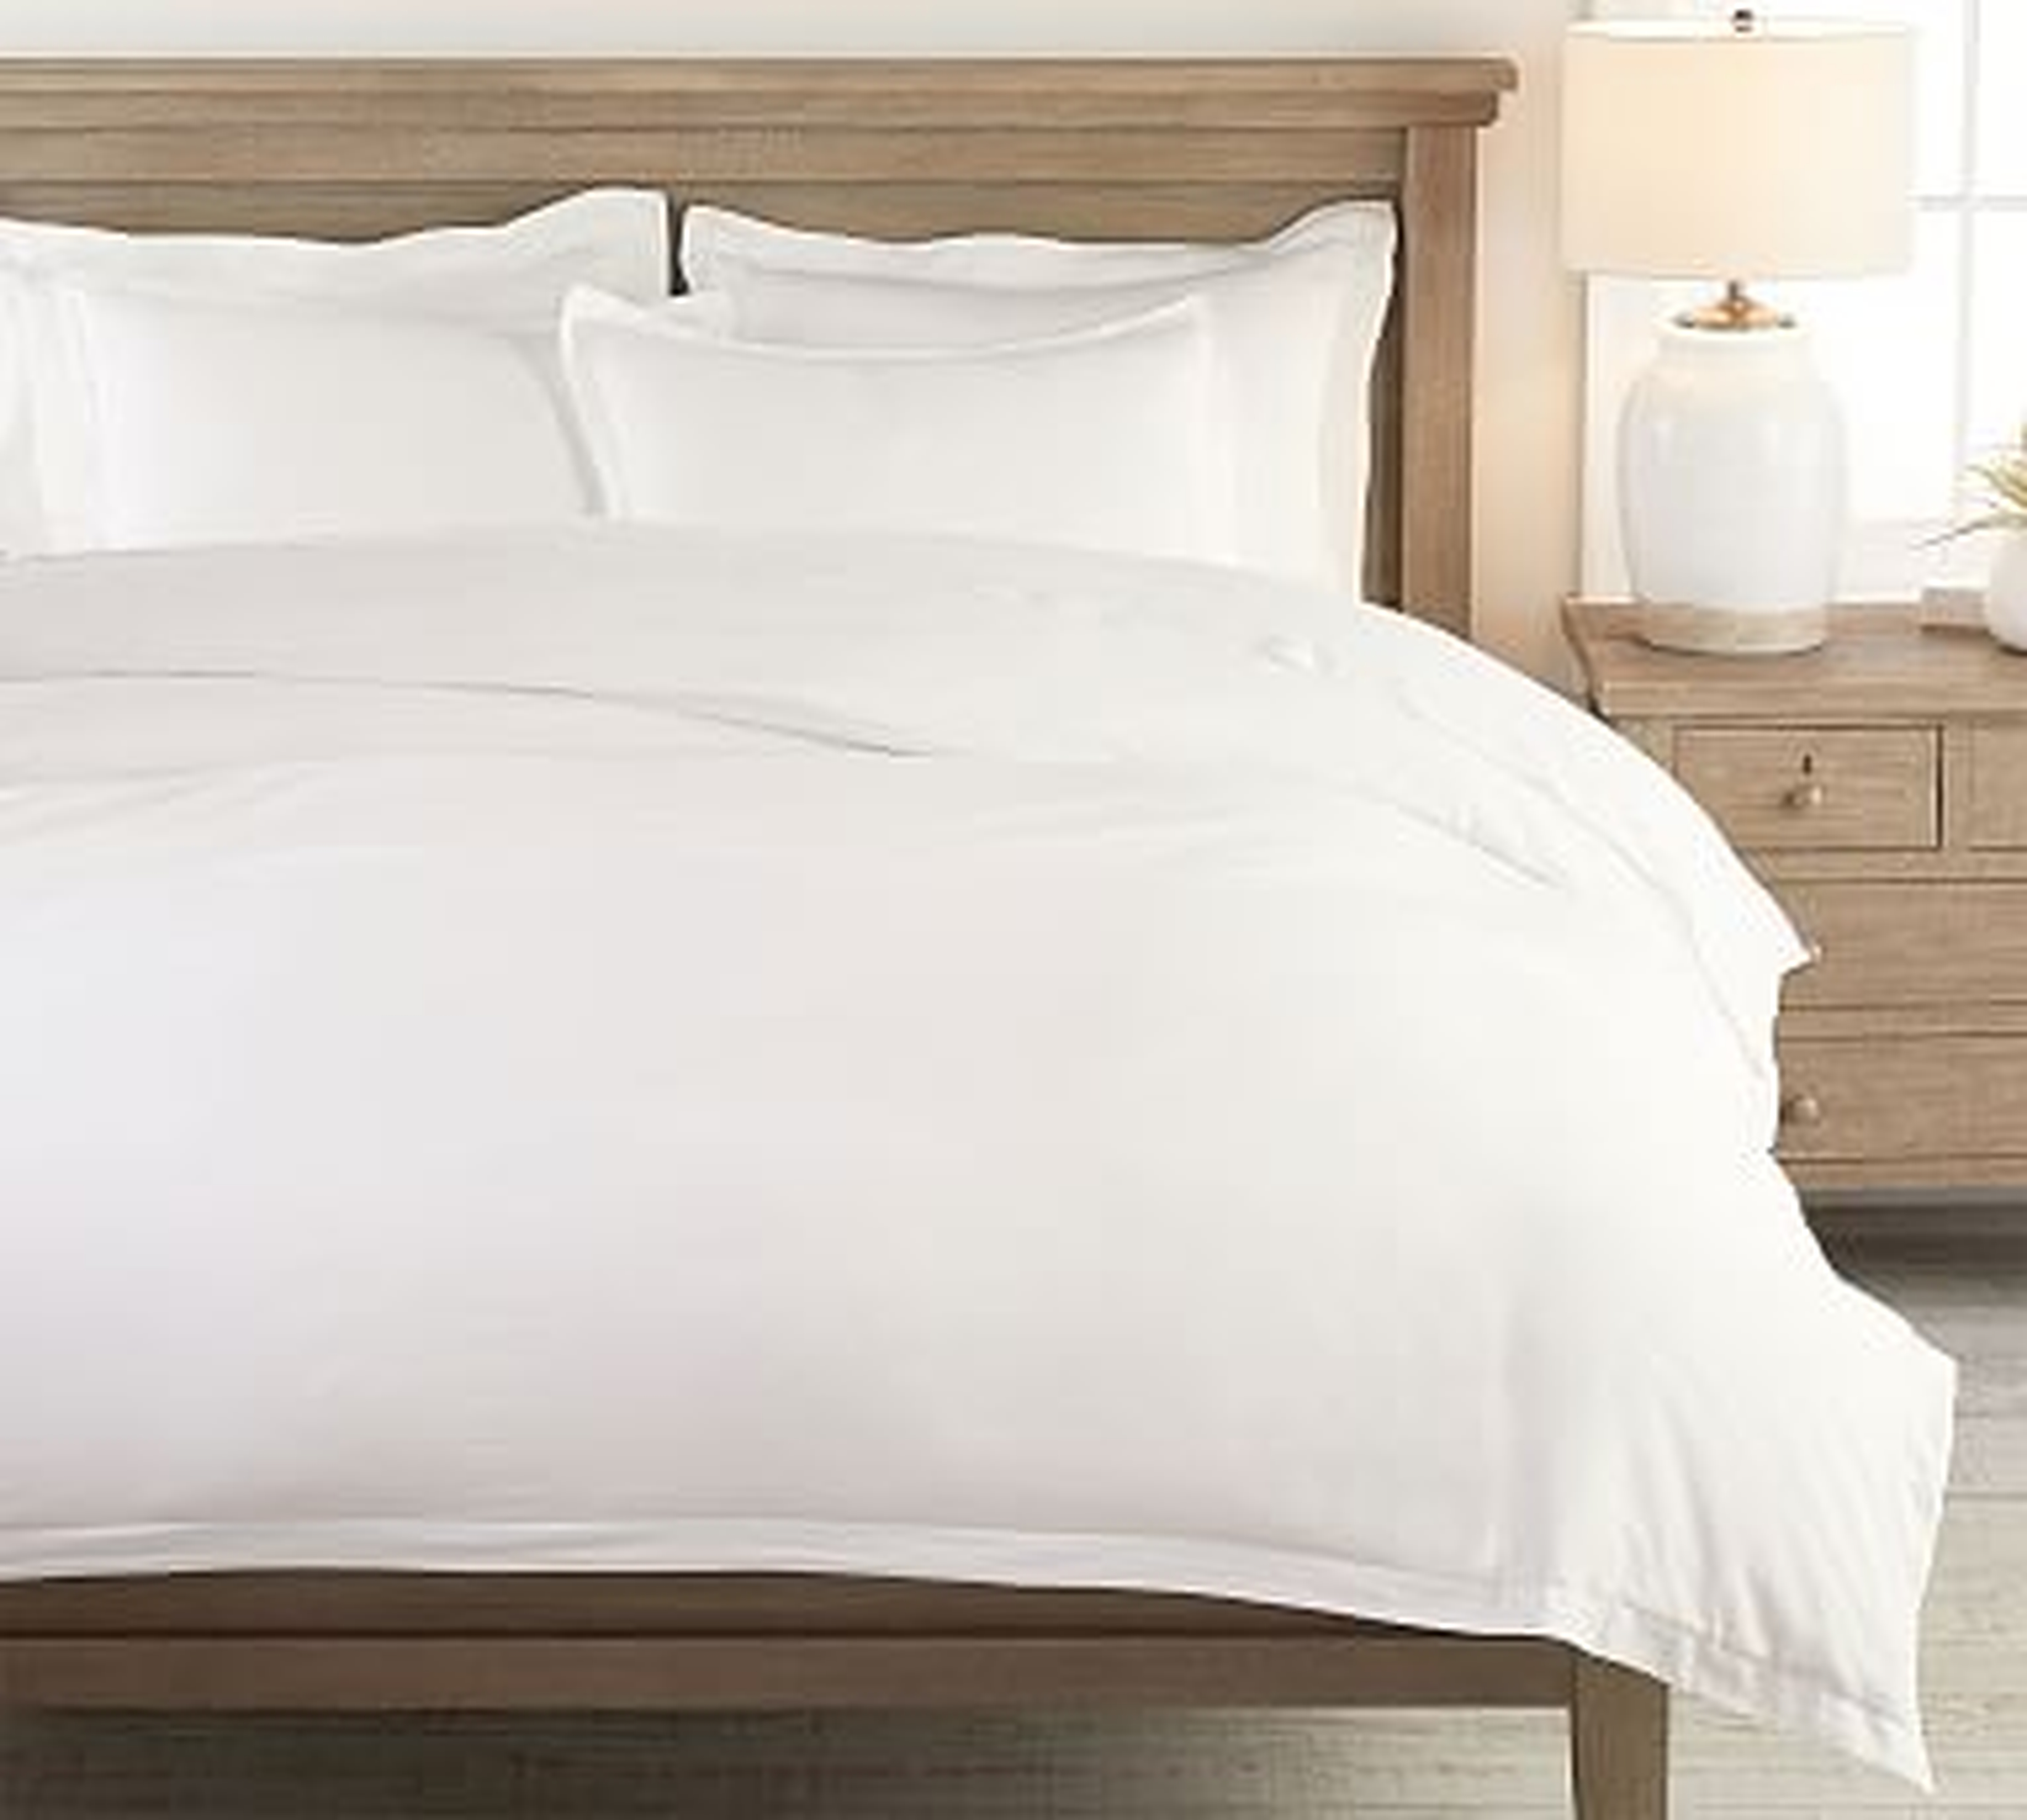 Washed Sateen Duvet Cover, King/Cal King, White - Pottery Barn